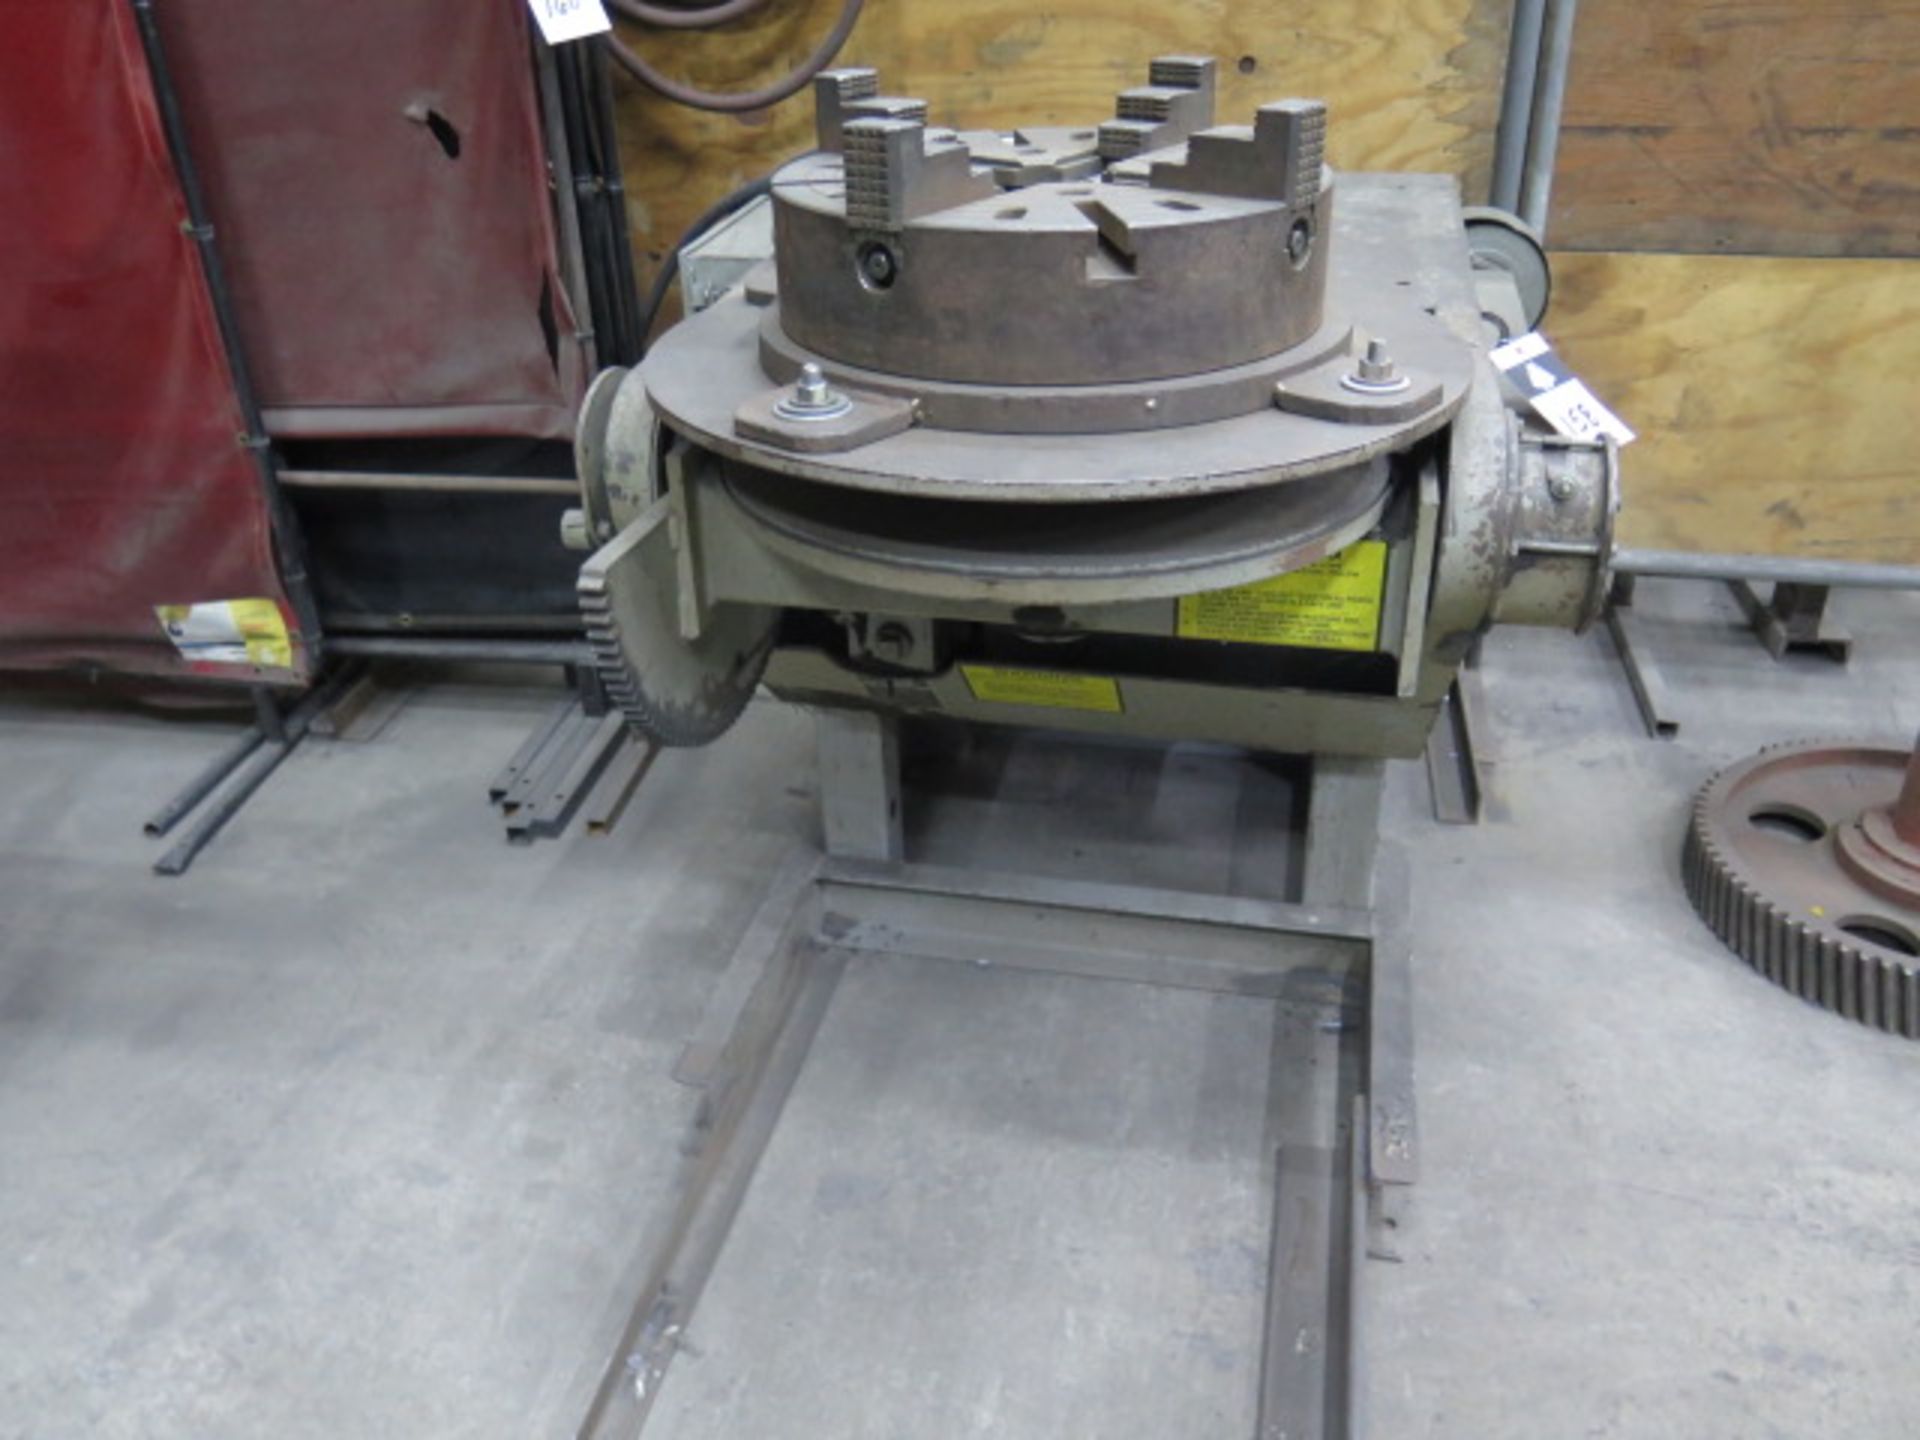 Koike Aronson 24” Welding Positioner s/n 011500 w/ 15” 4-Jaw Chuck (SOLD AS-IS - NO WARRANTY) - Image 2 of 7